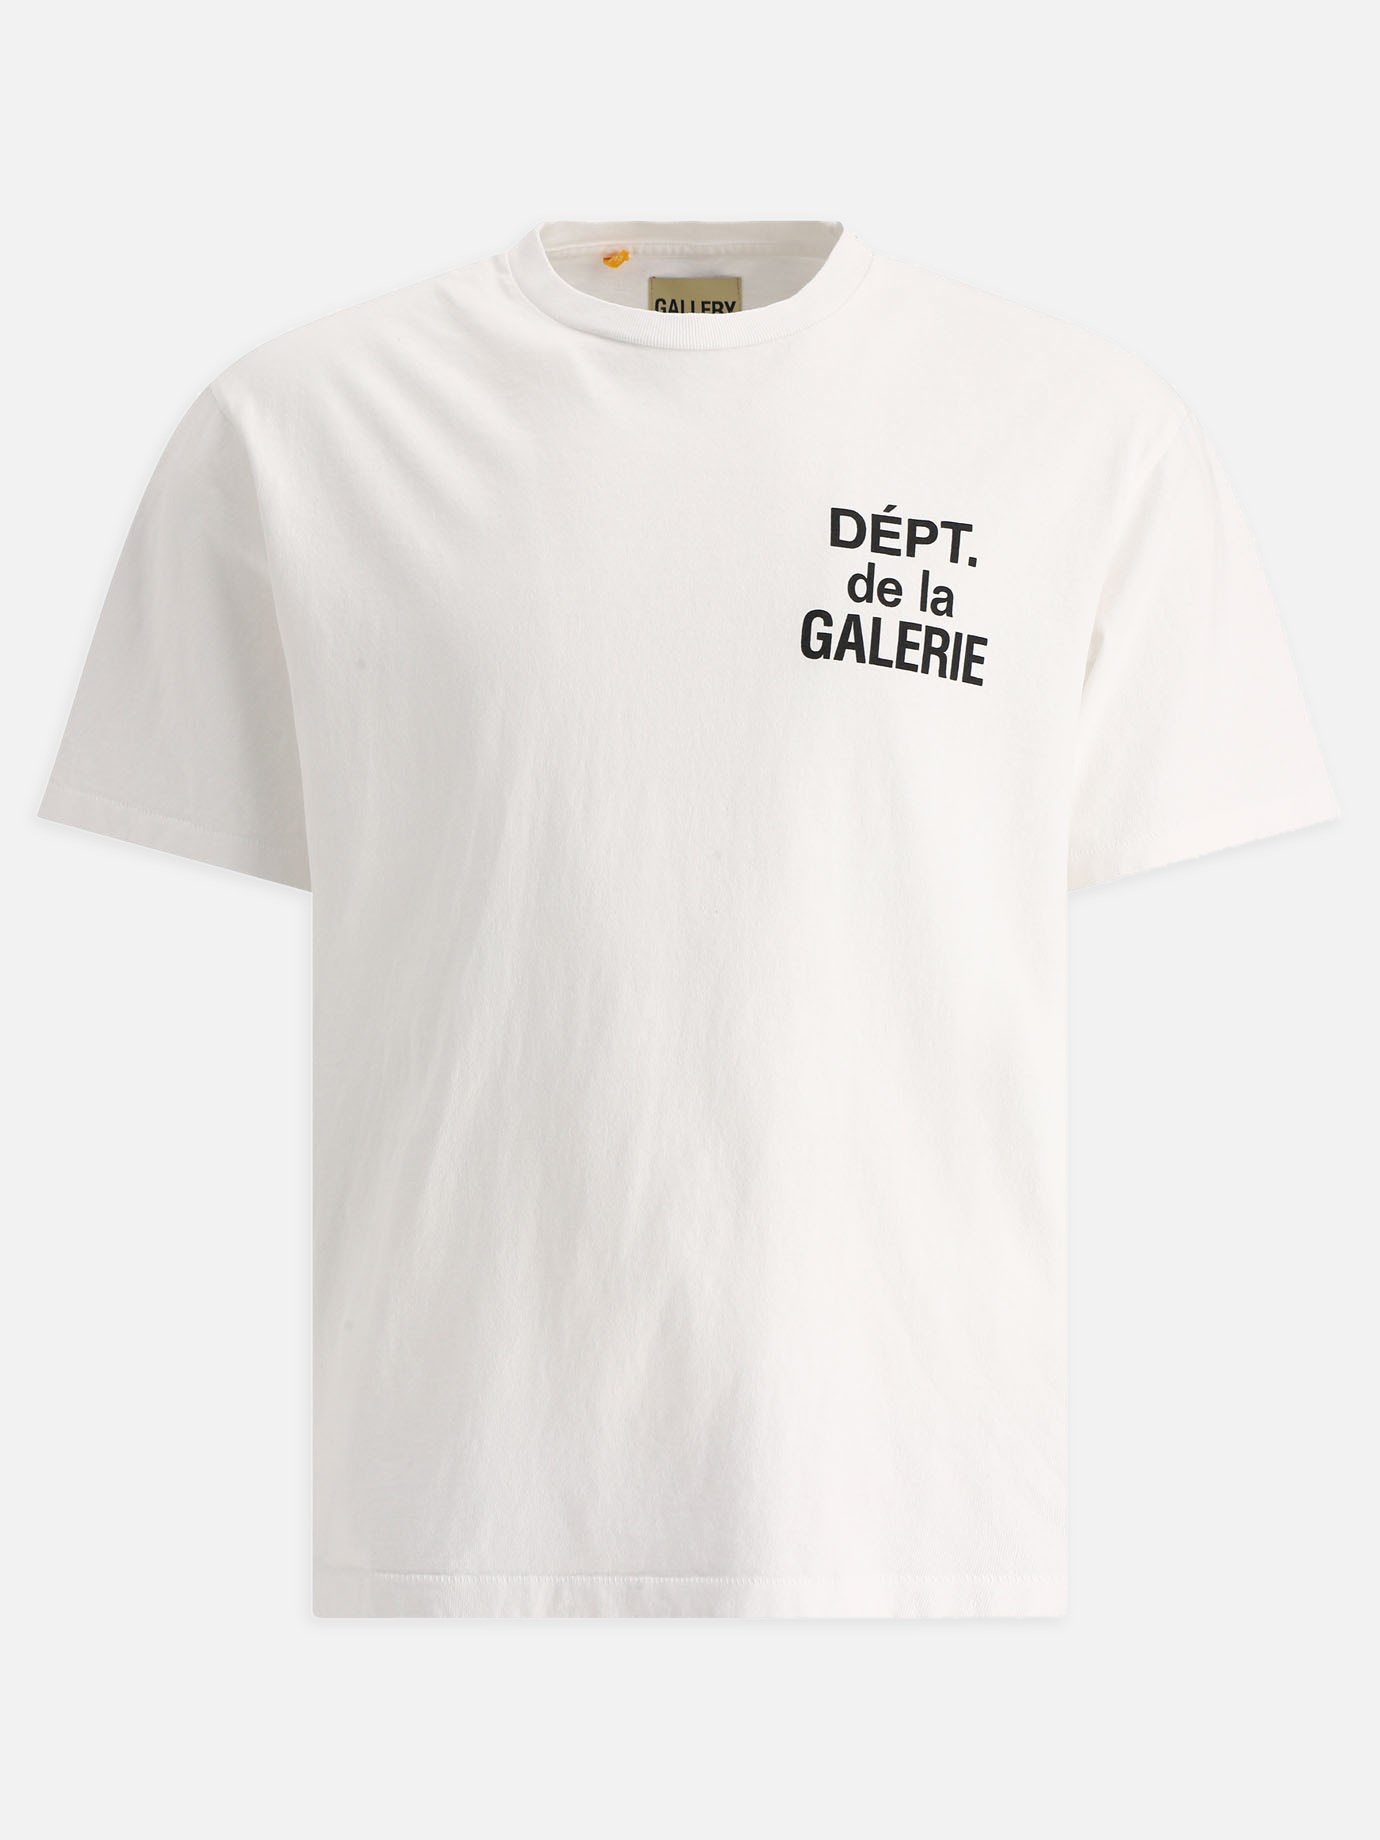 T-shirt  French by Gallery Dept. - 0